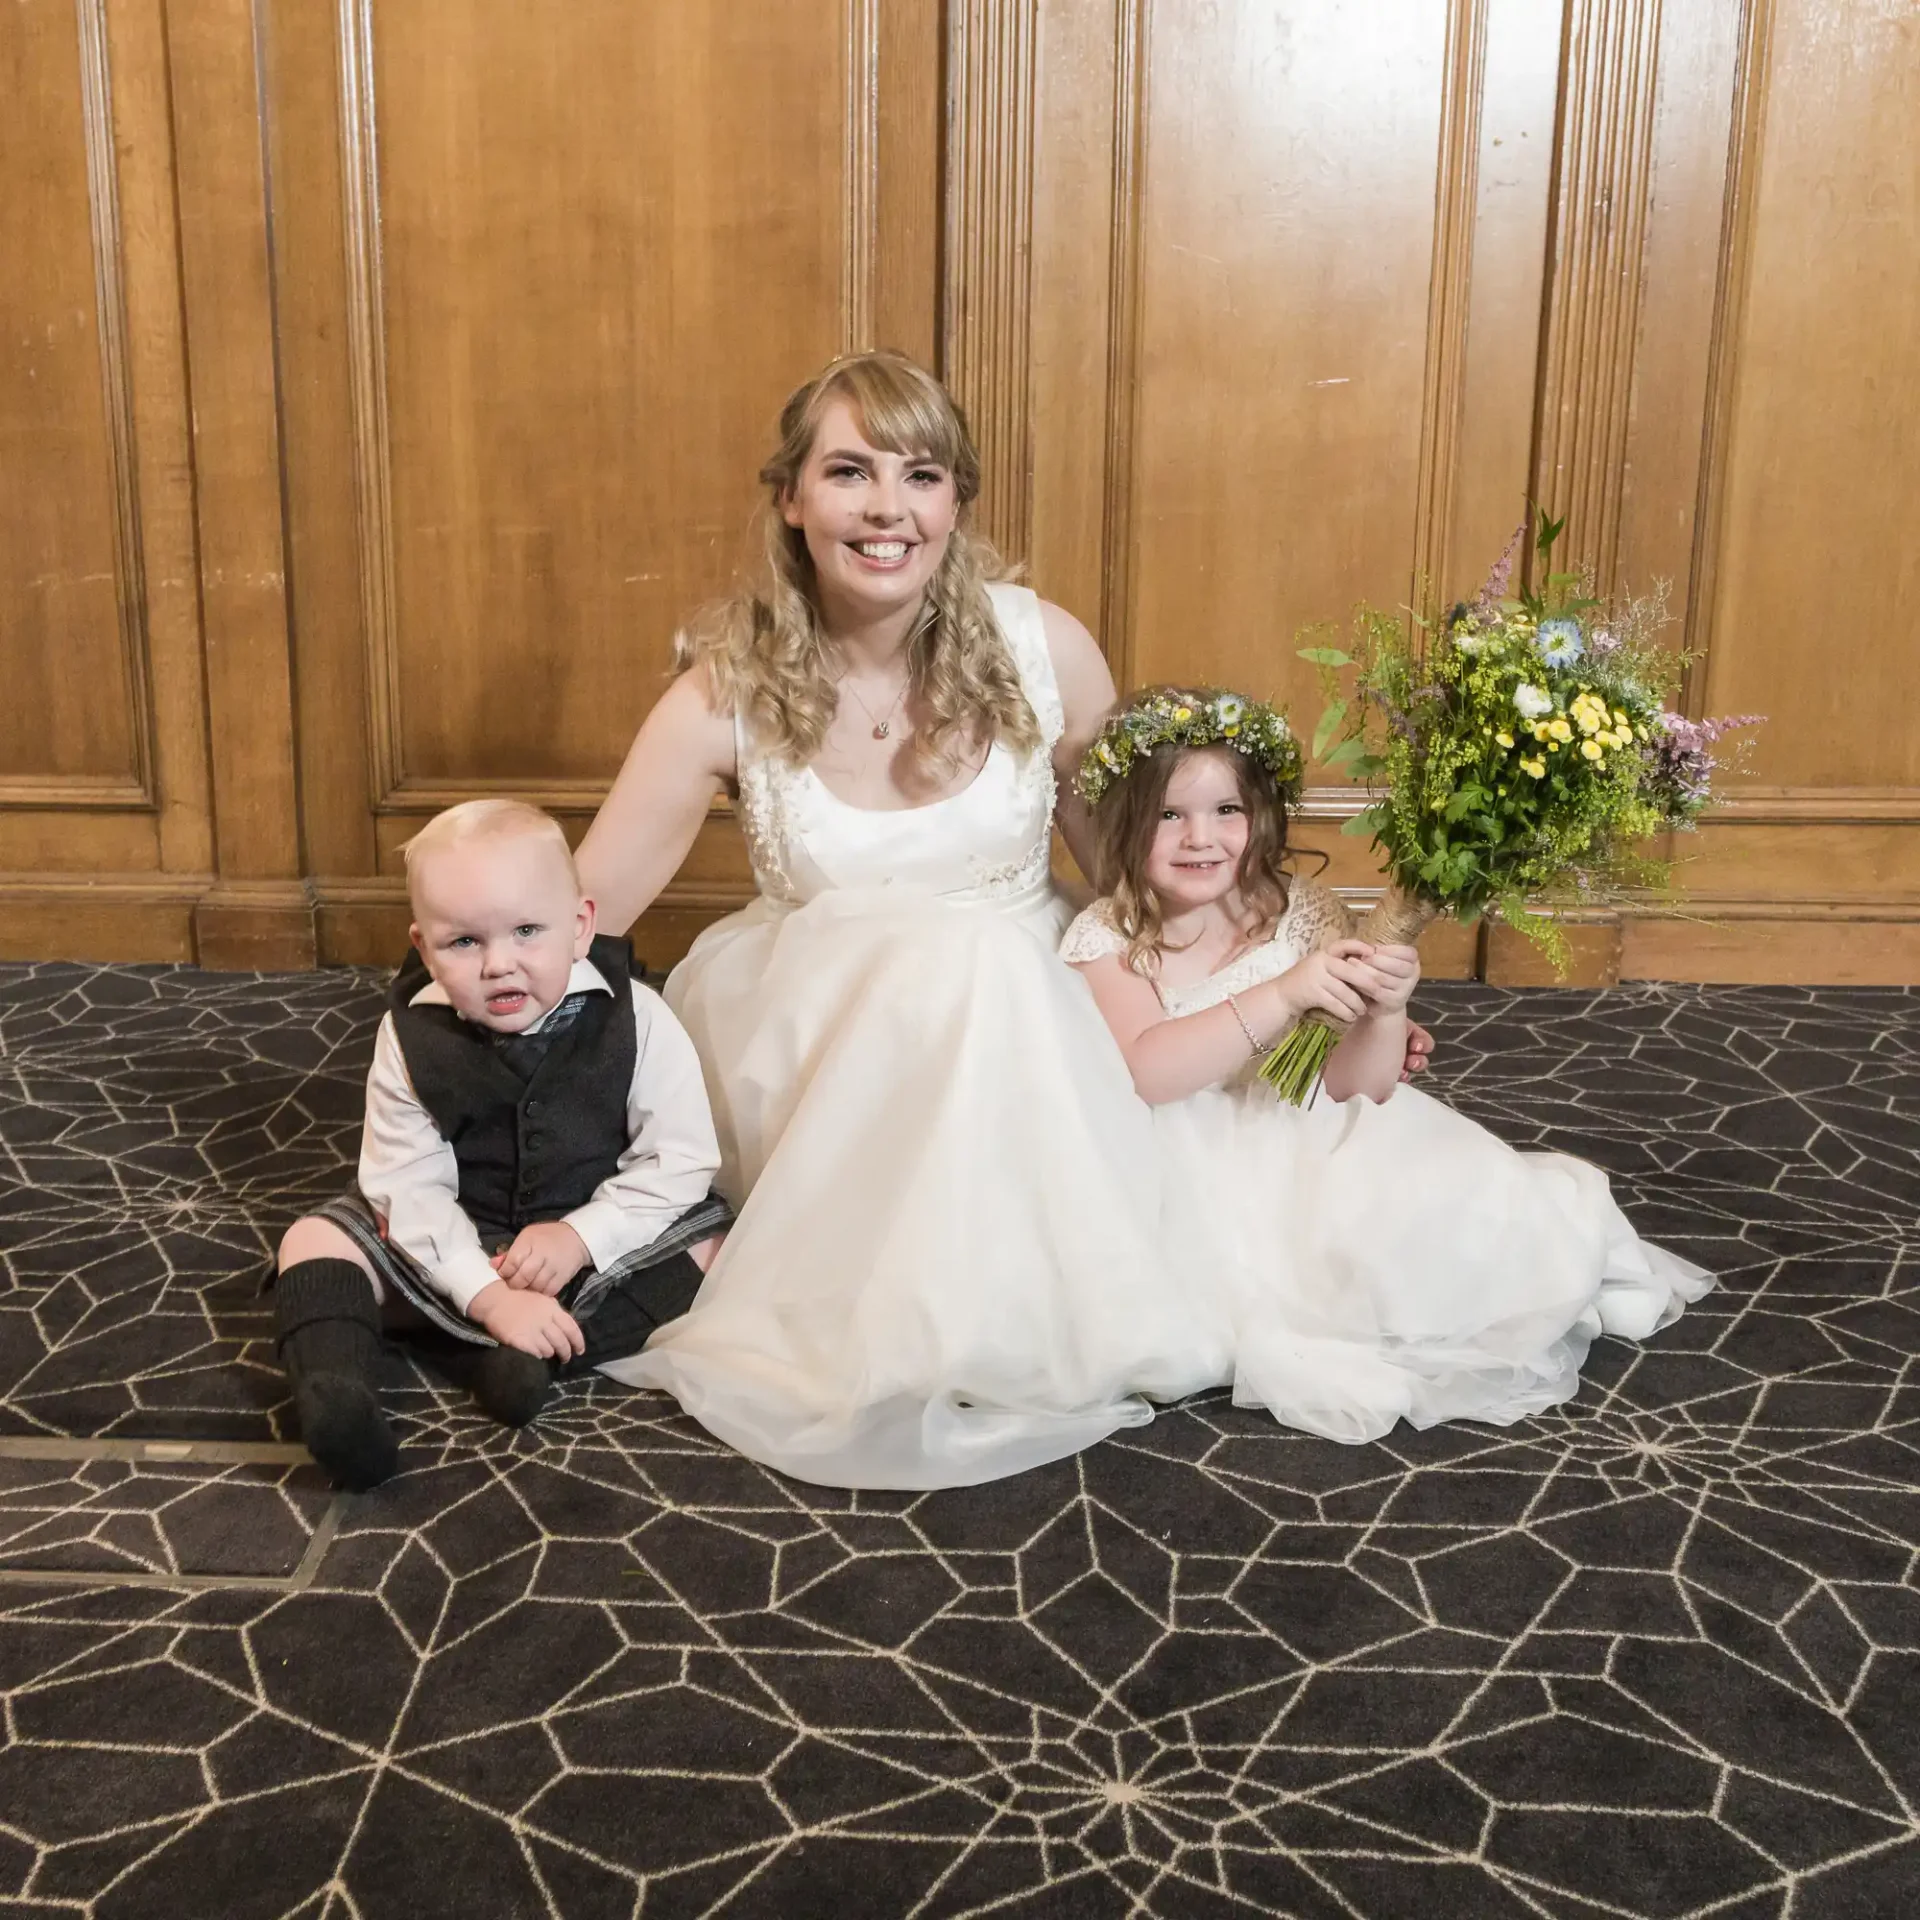 A bride in a white dress sits on the floor with a young boy in a black kilt and a little girl in a white dress, all smiling, in front of a wooden panel and floral bouquet.